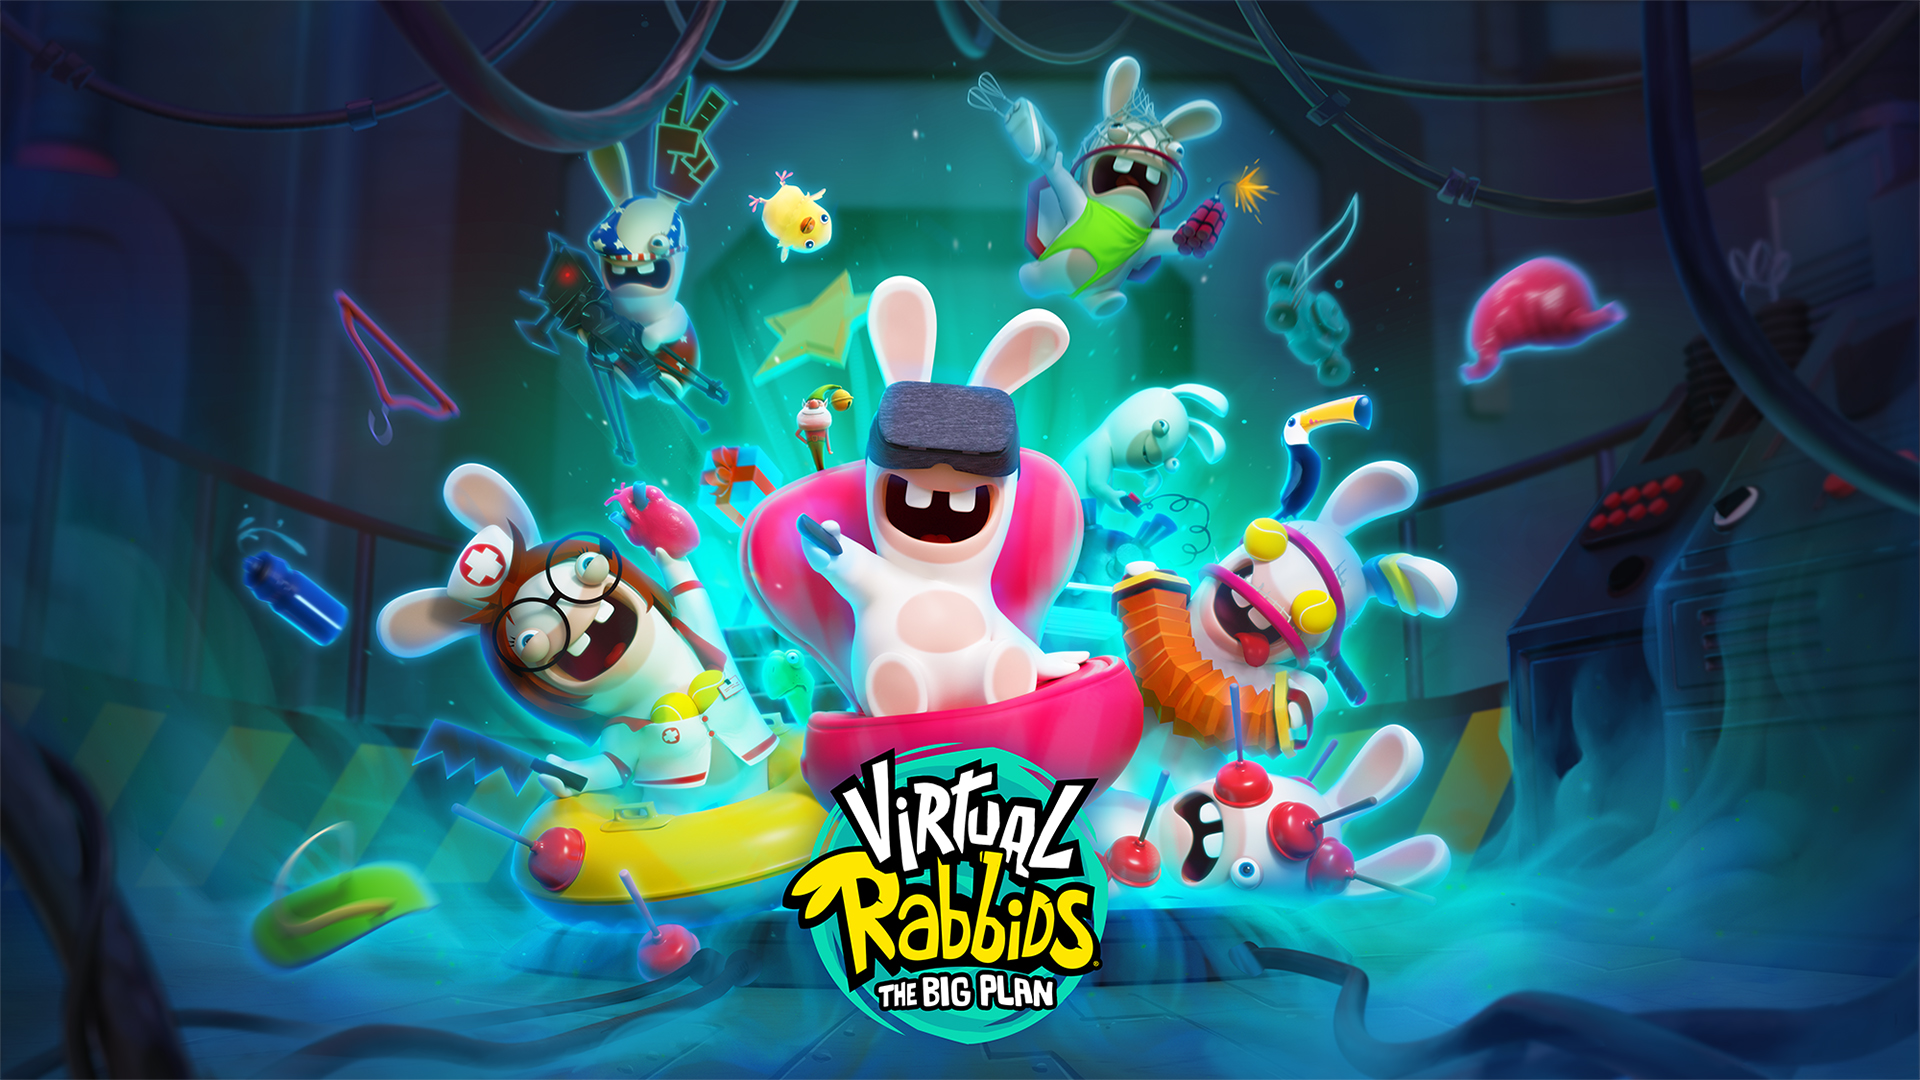 Ubisoft Announces Rabbids VR Experience for Daydream Available in the